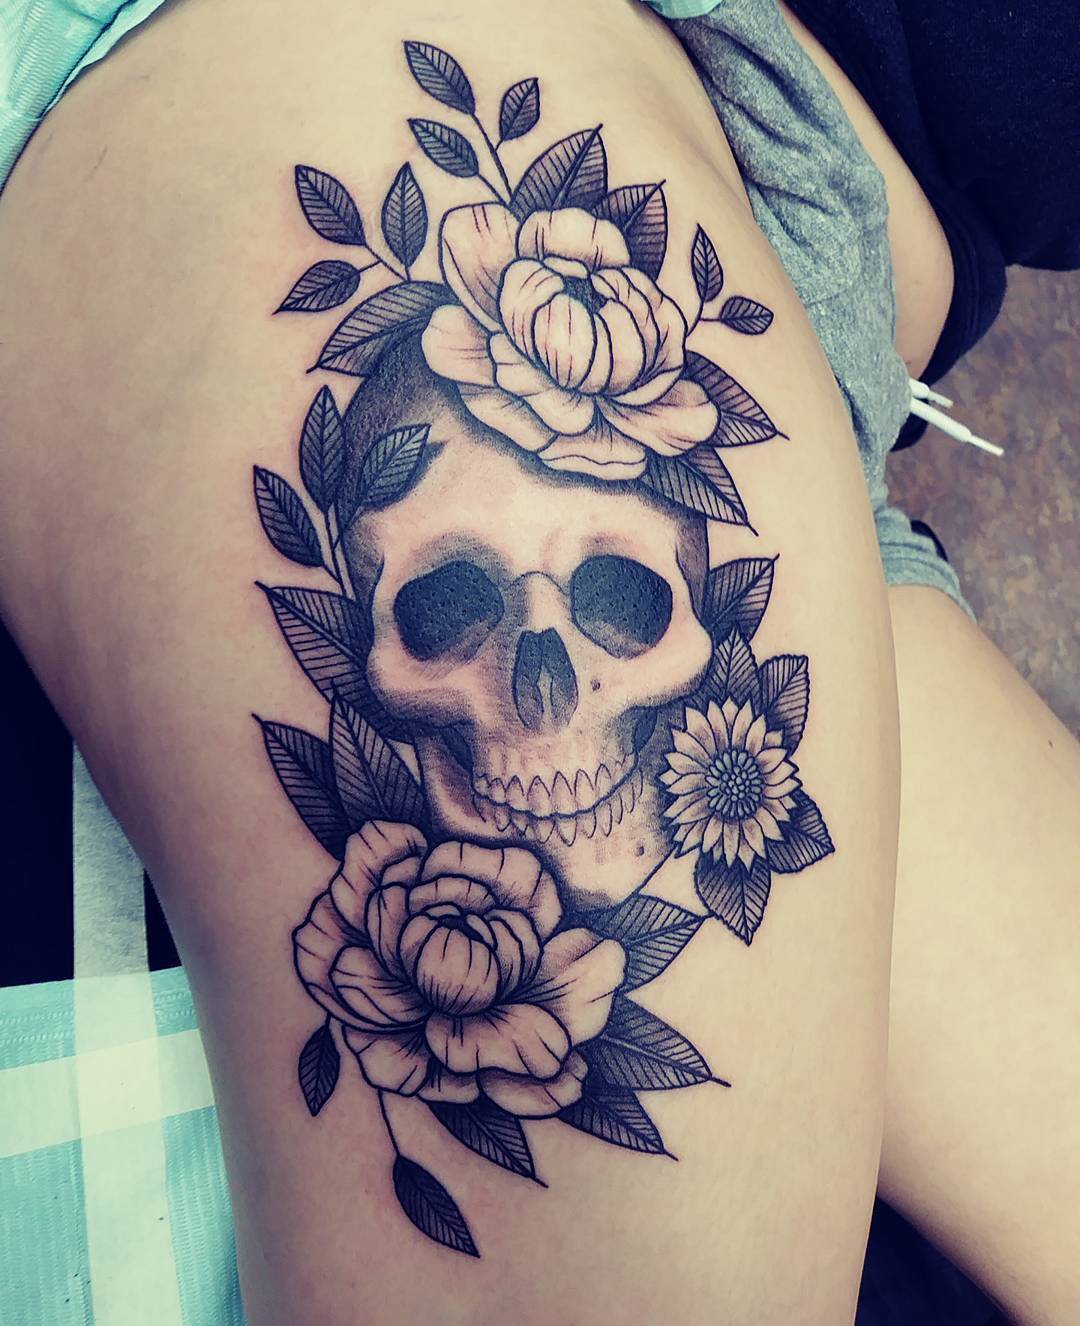 Awesome Skull With Sunflower Thigh Tattoo Design For Beautiful Women